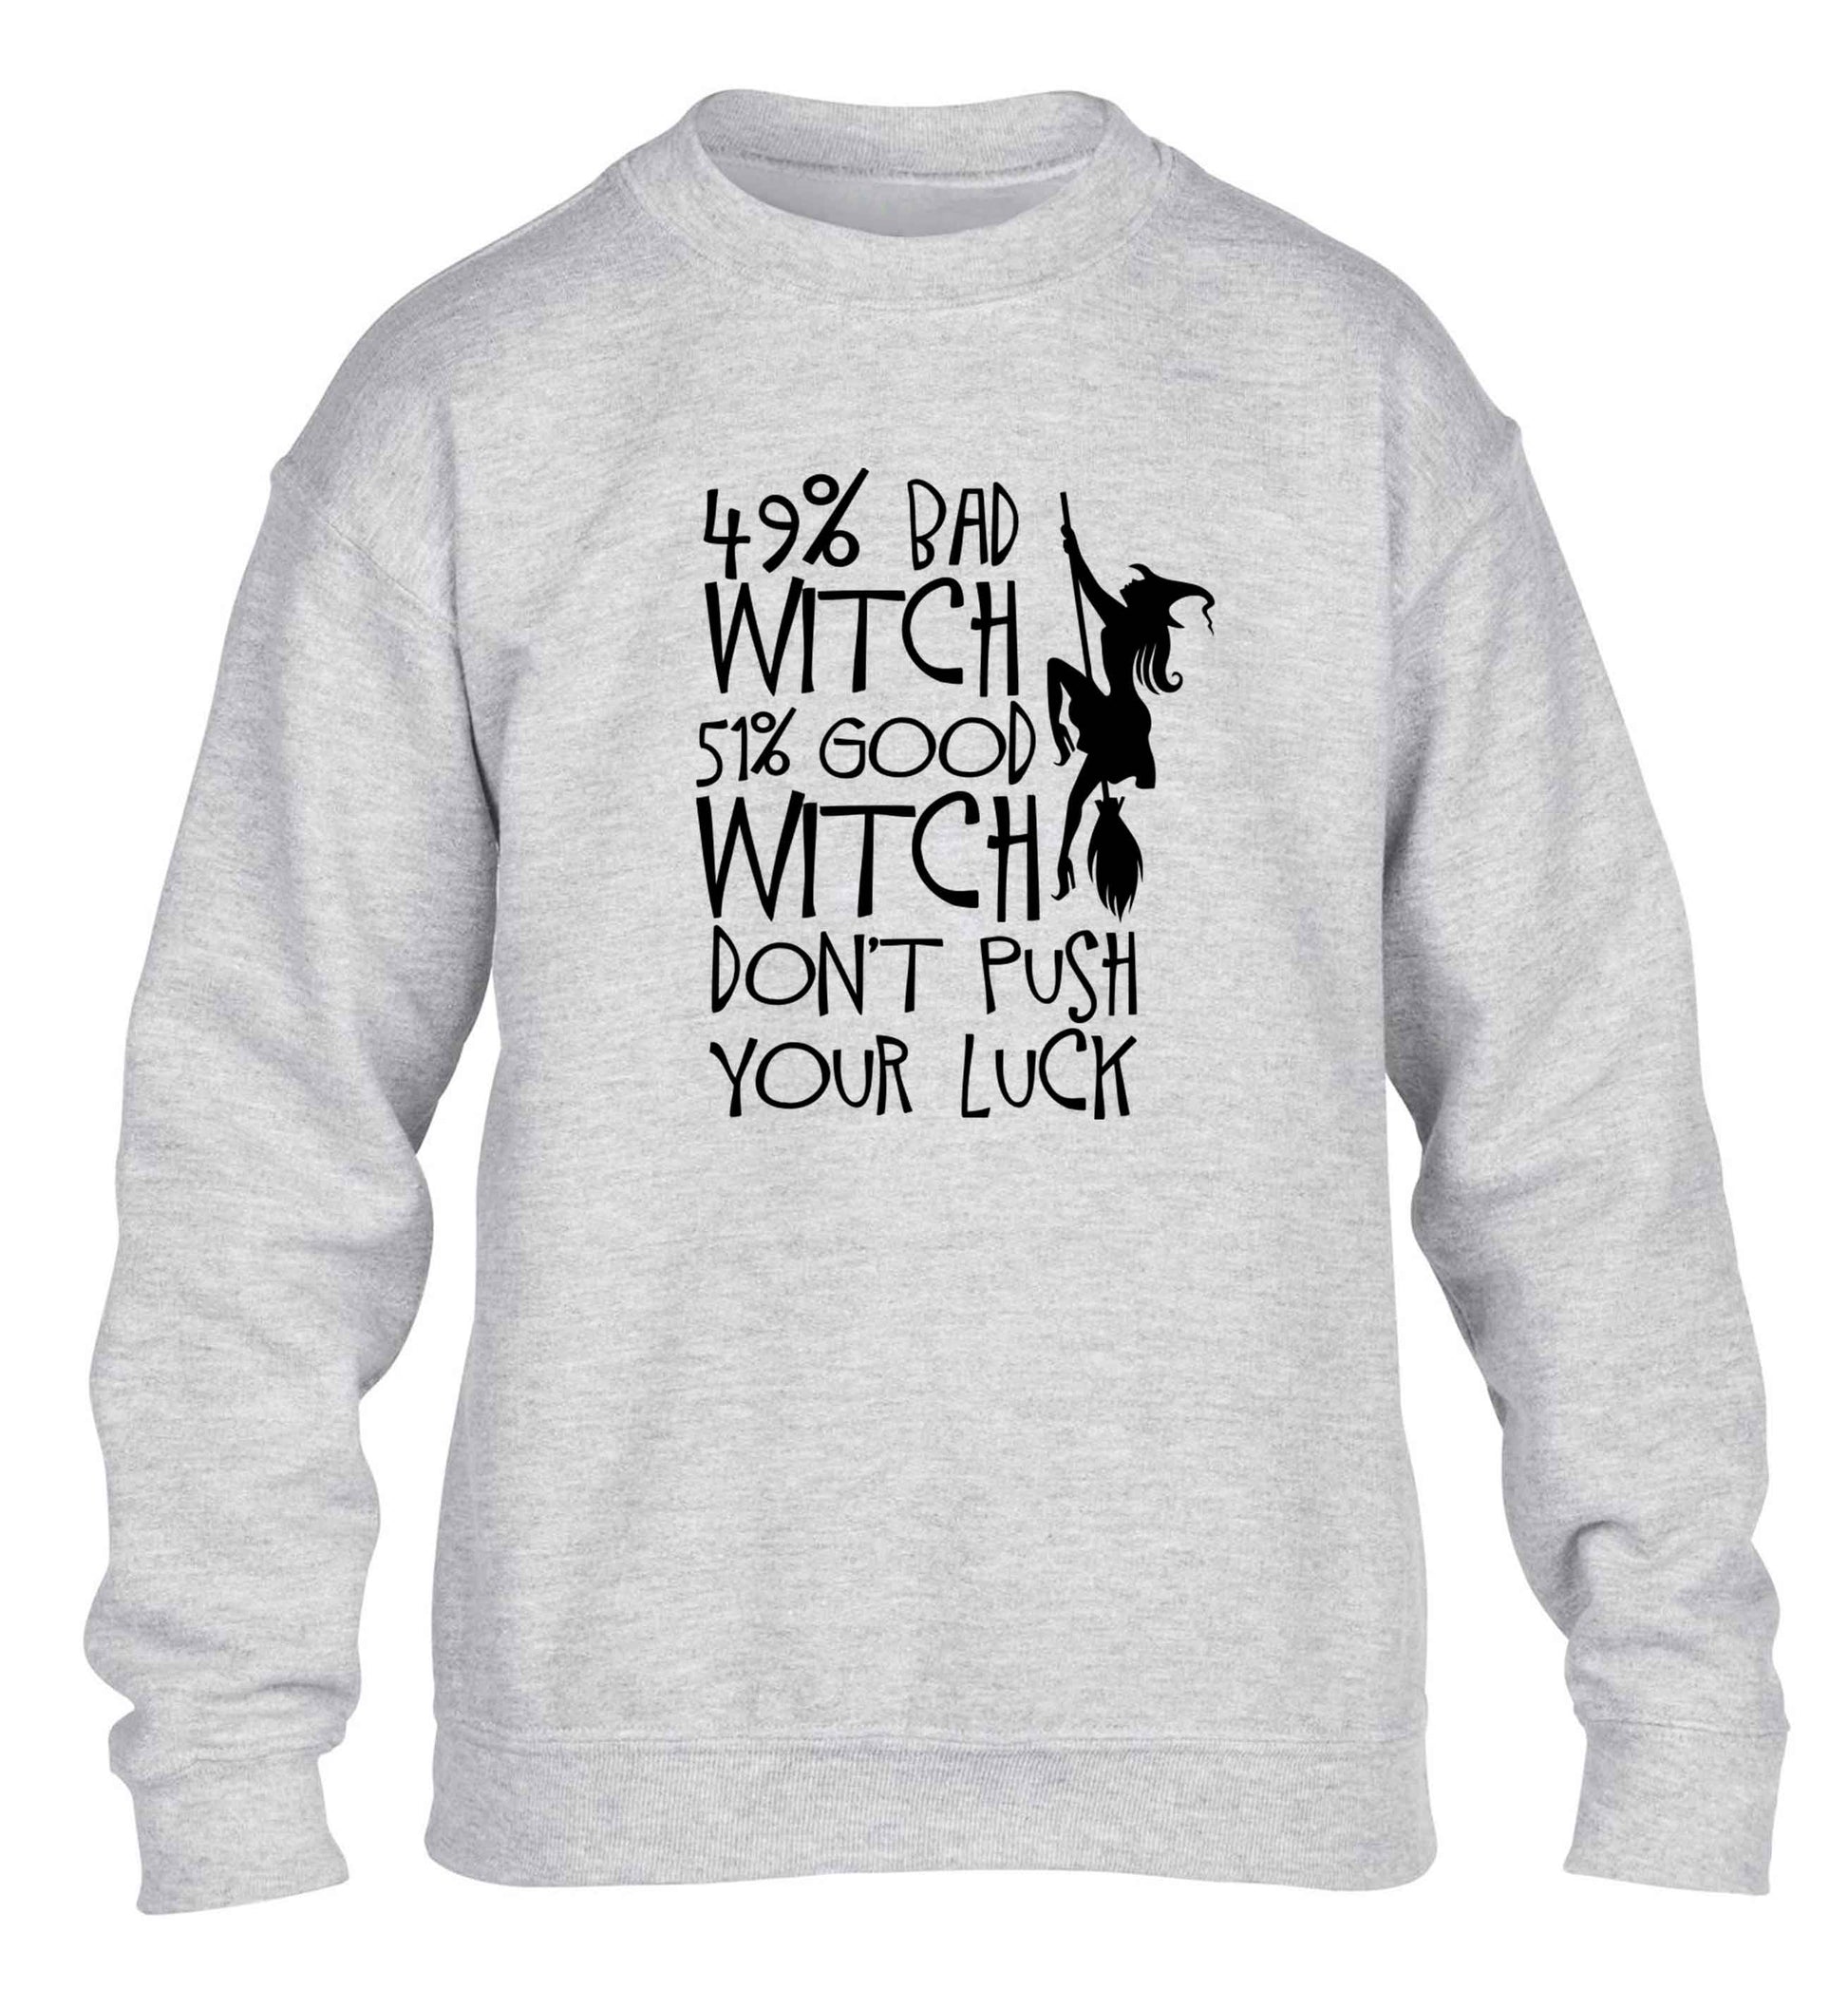 49% bad witch 51% good witch don't push your luck children's grey sweater 12-13 Years